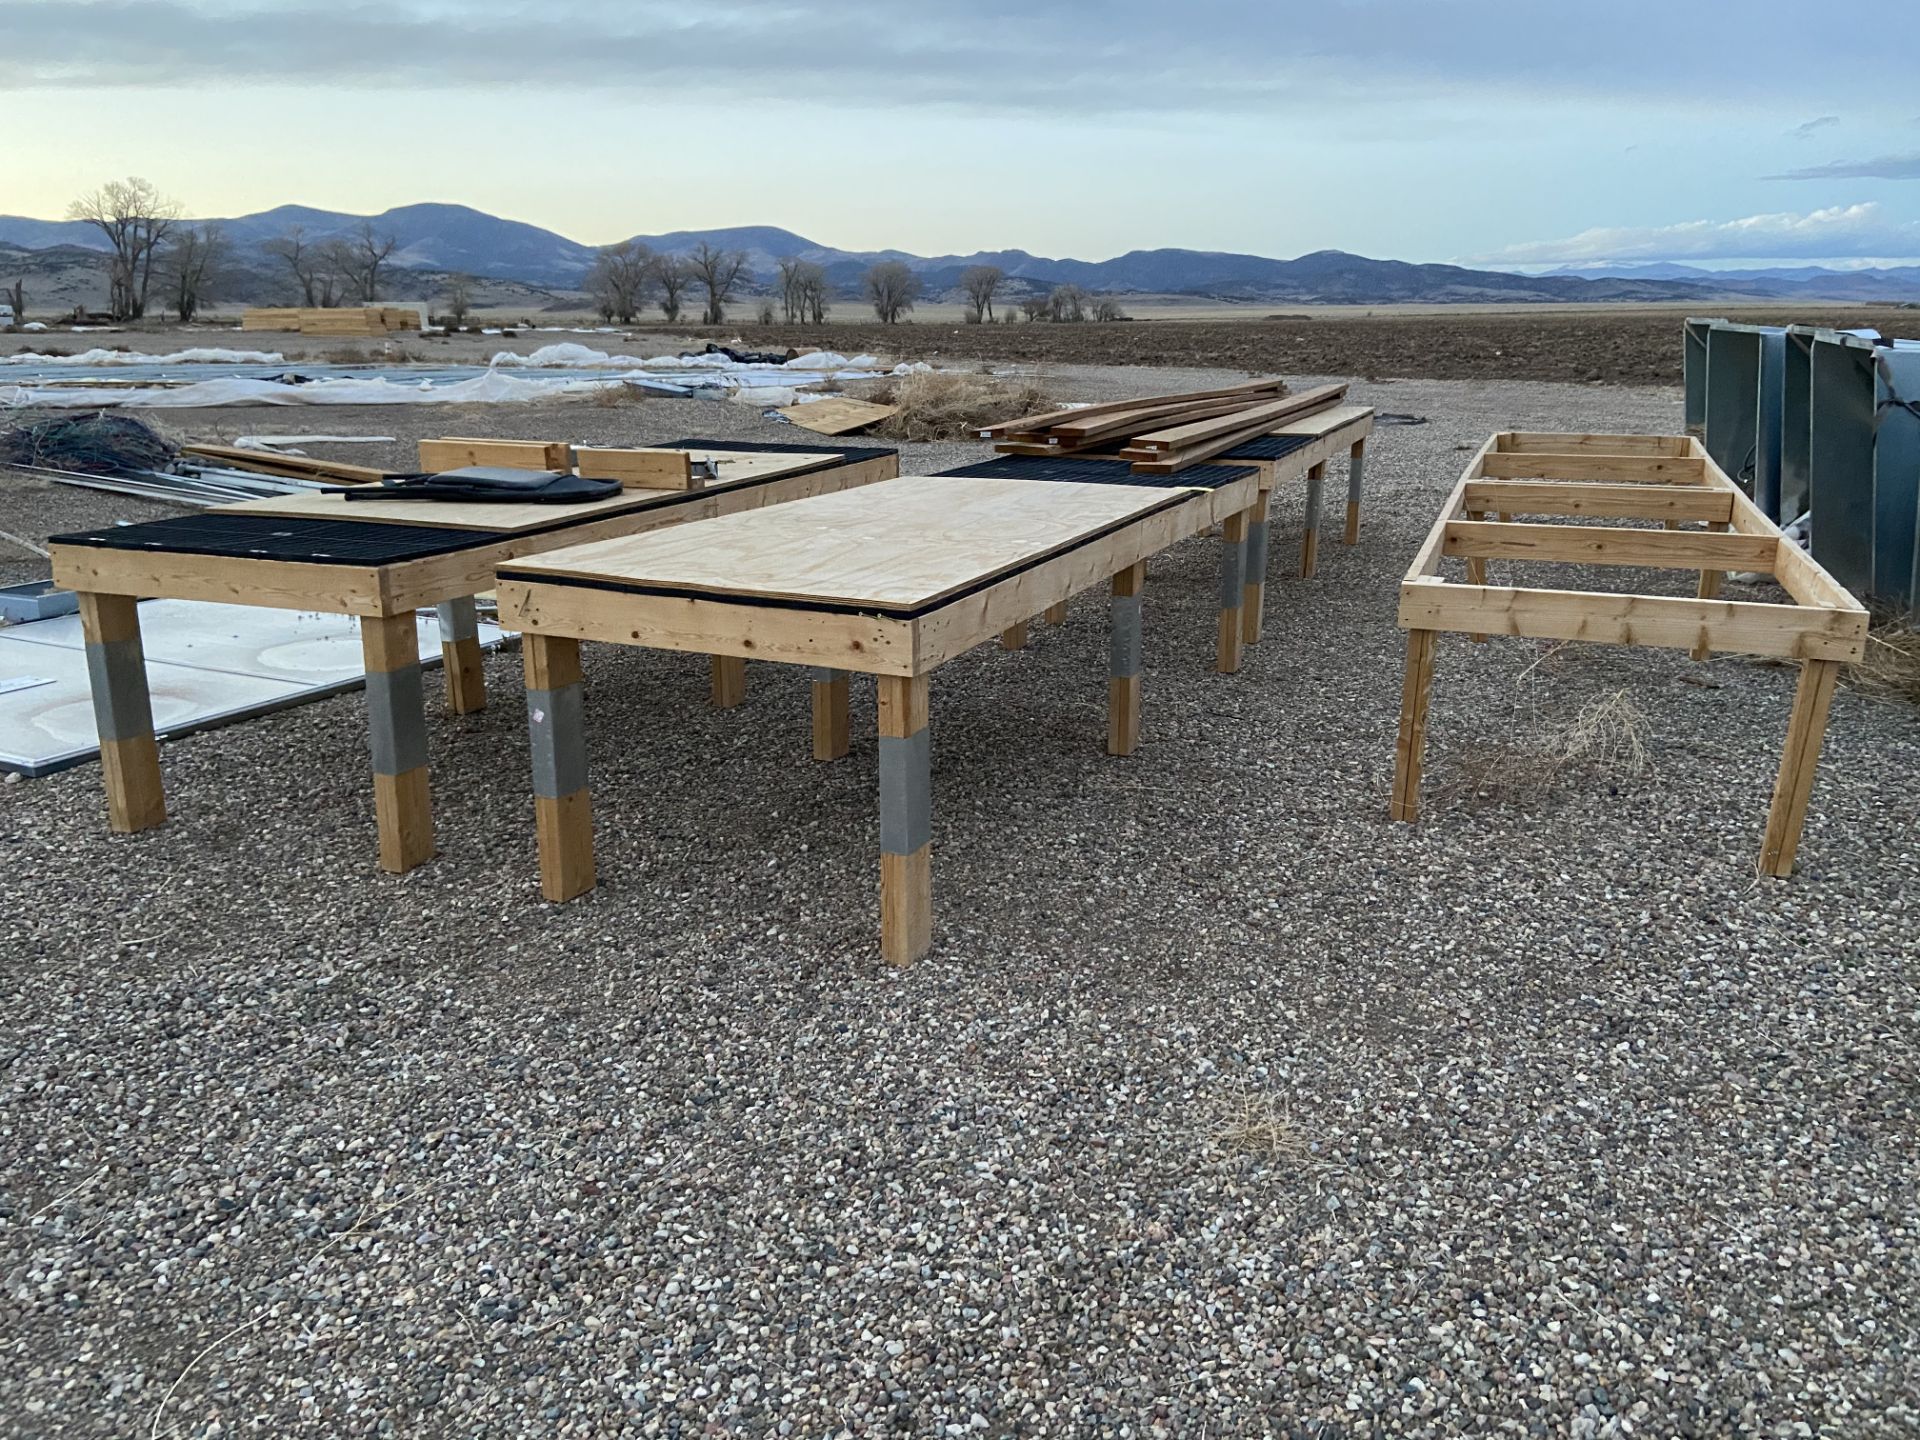 Wooden Tables for Drying Racks for Product, 70" wide x 15" long, QTY 4, Rigging Fee $20